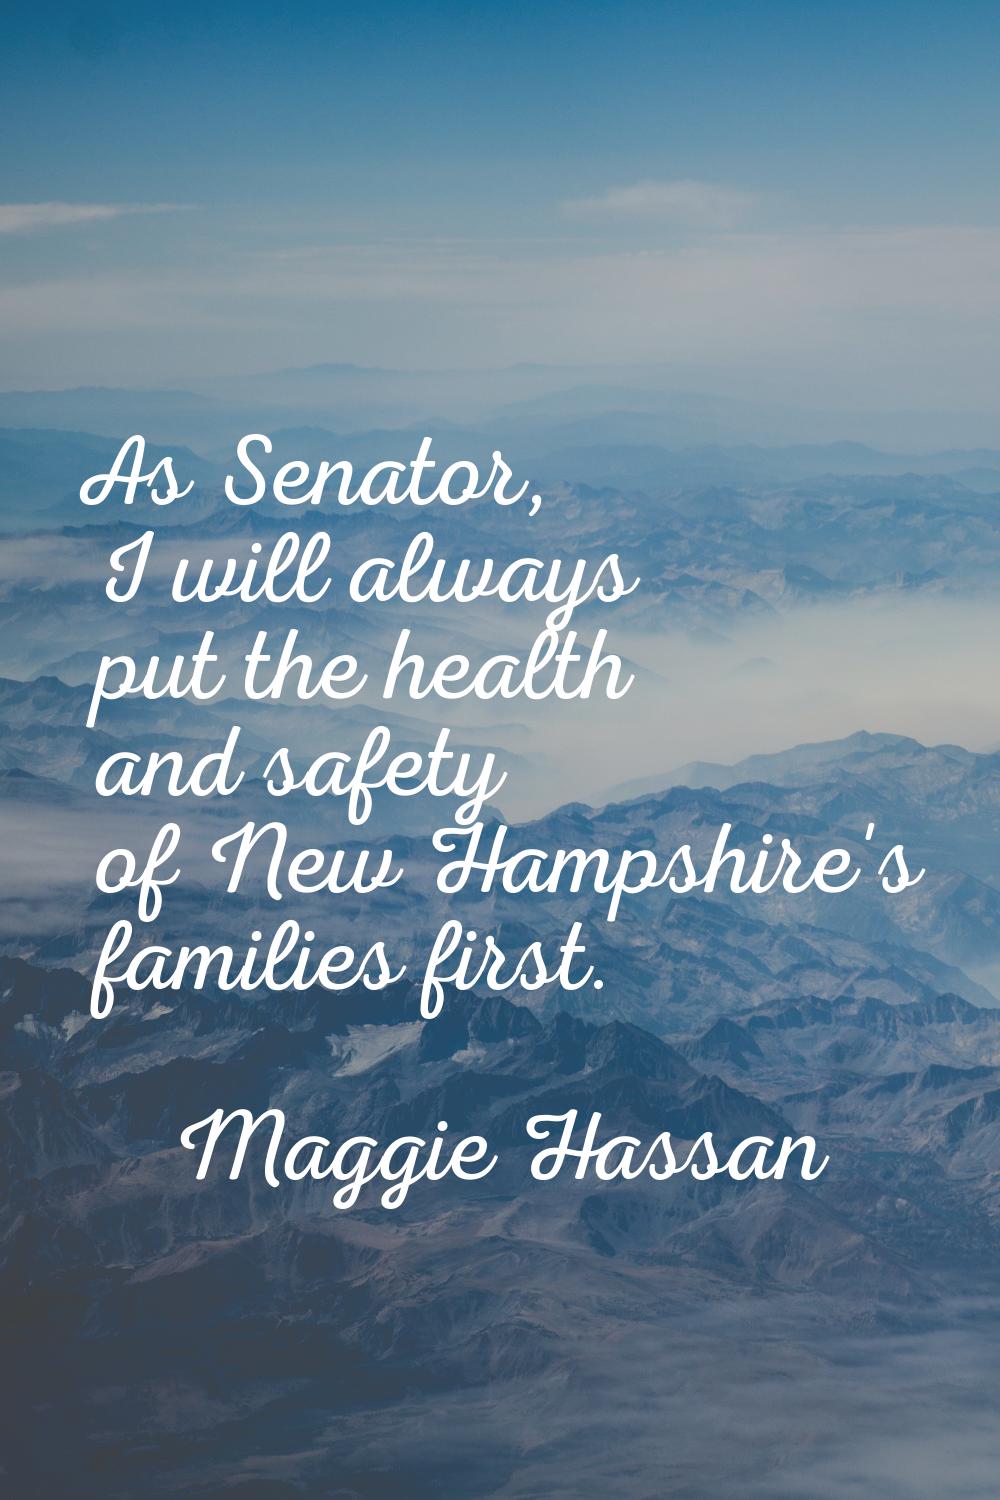 As Senator, I will always put the health and safety of New Hampshire's families first.